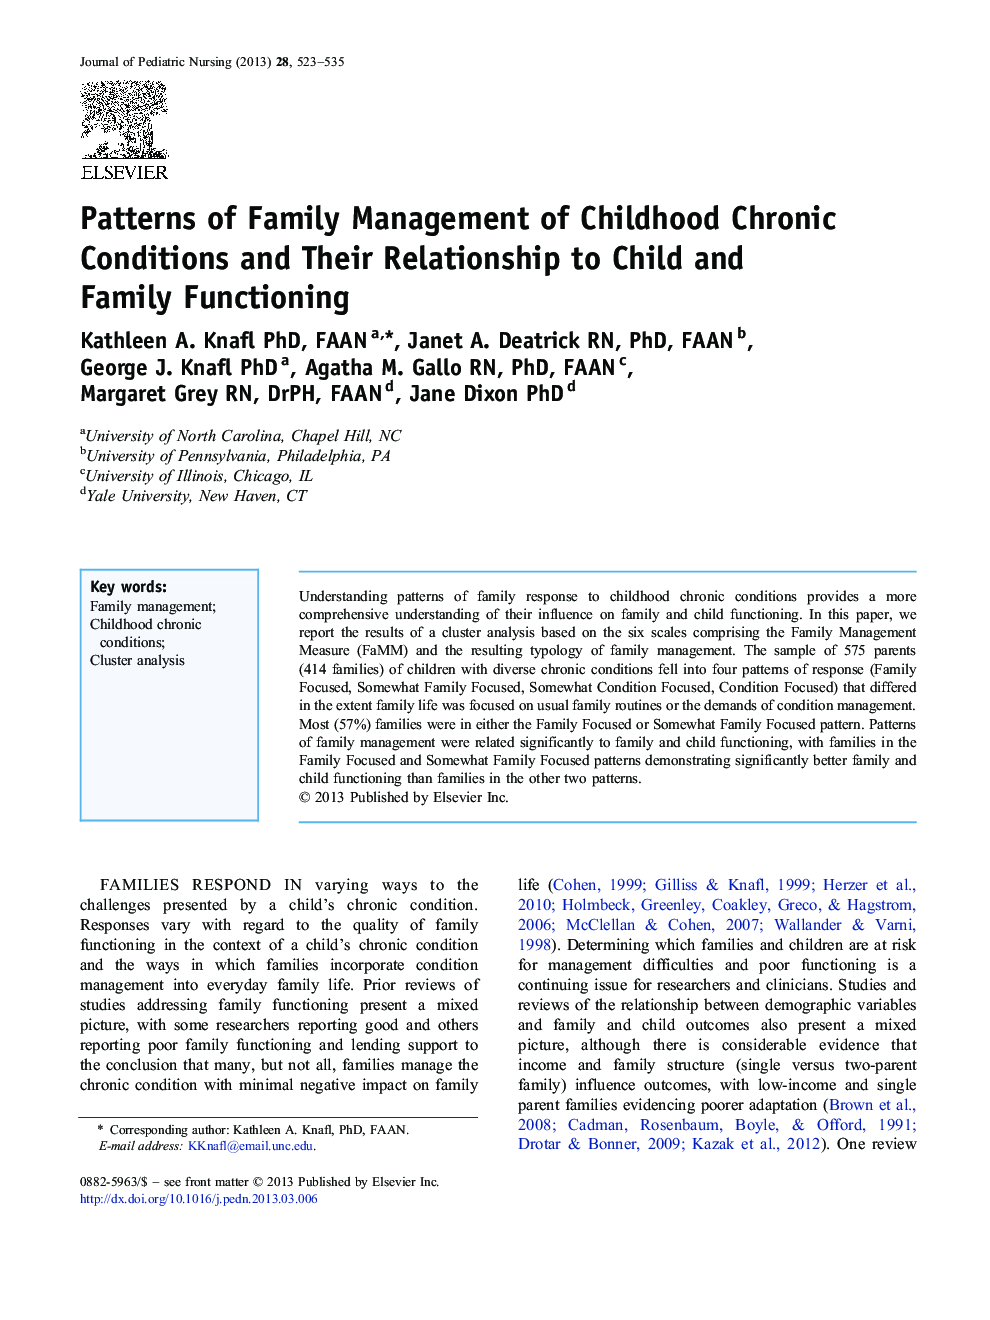 Patterns of Family Management of Childhood Chronic Conditions and Their Relationship to Child and Family Functioning